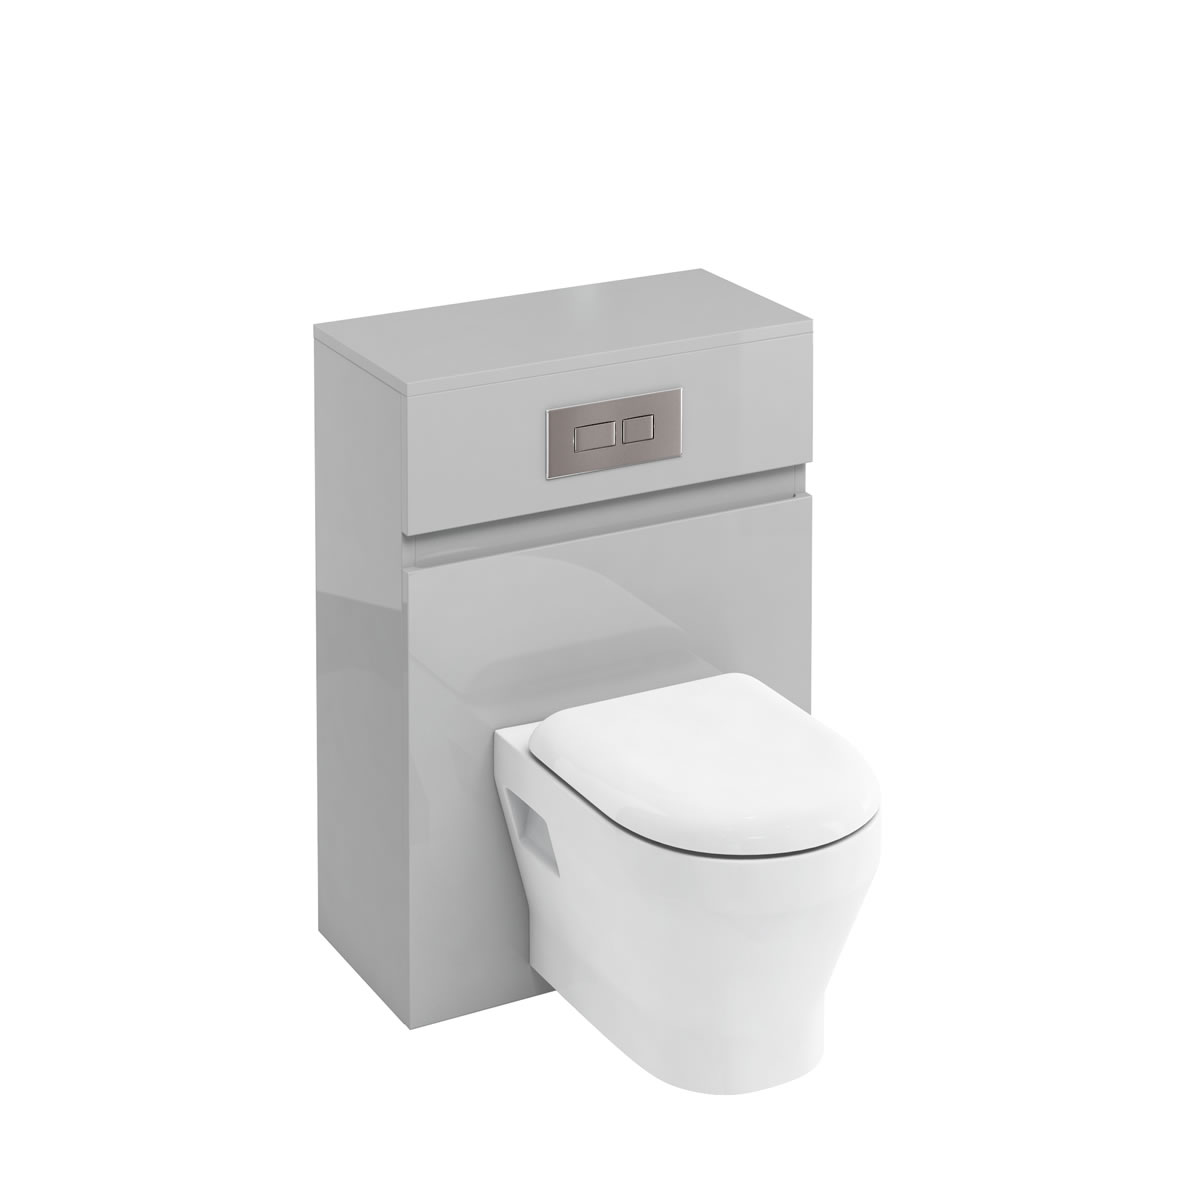 D30 wall hung WC unit with flush plate - light grey